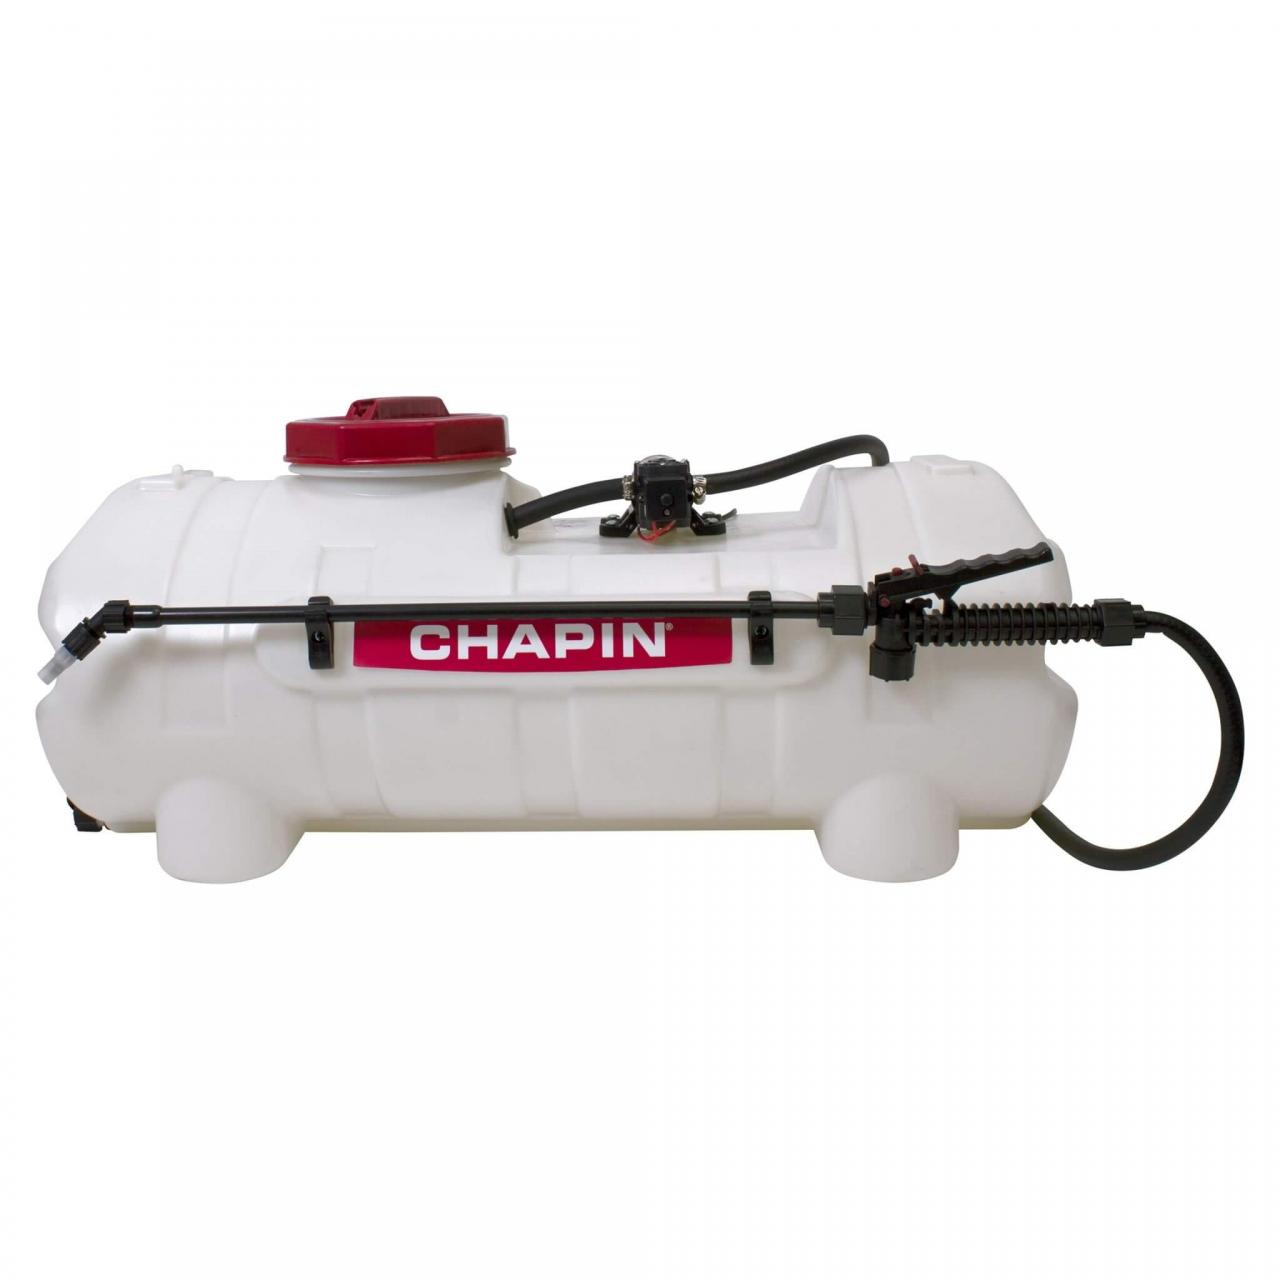 15-Gallon BioLogic 6500 Chapin Outfitters ATV Sprayer For Fertilizer  Herbicides and Pesticides Kitchen Faucets Kitchen Sink Faucets vriksha.in